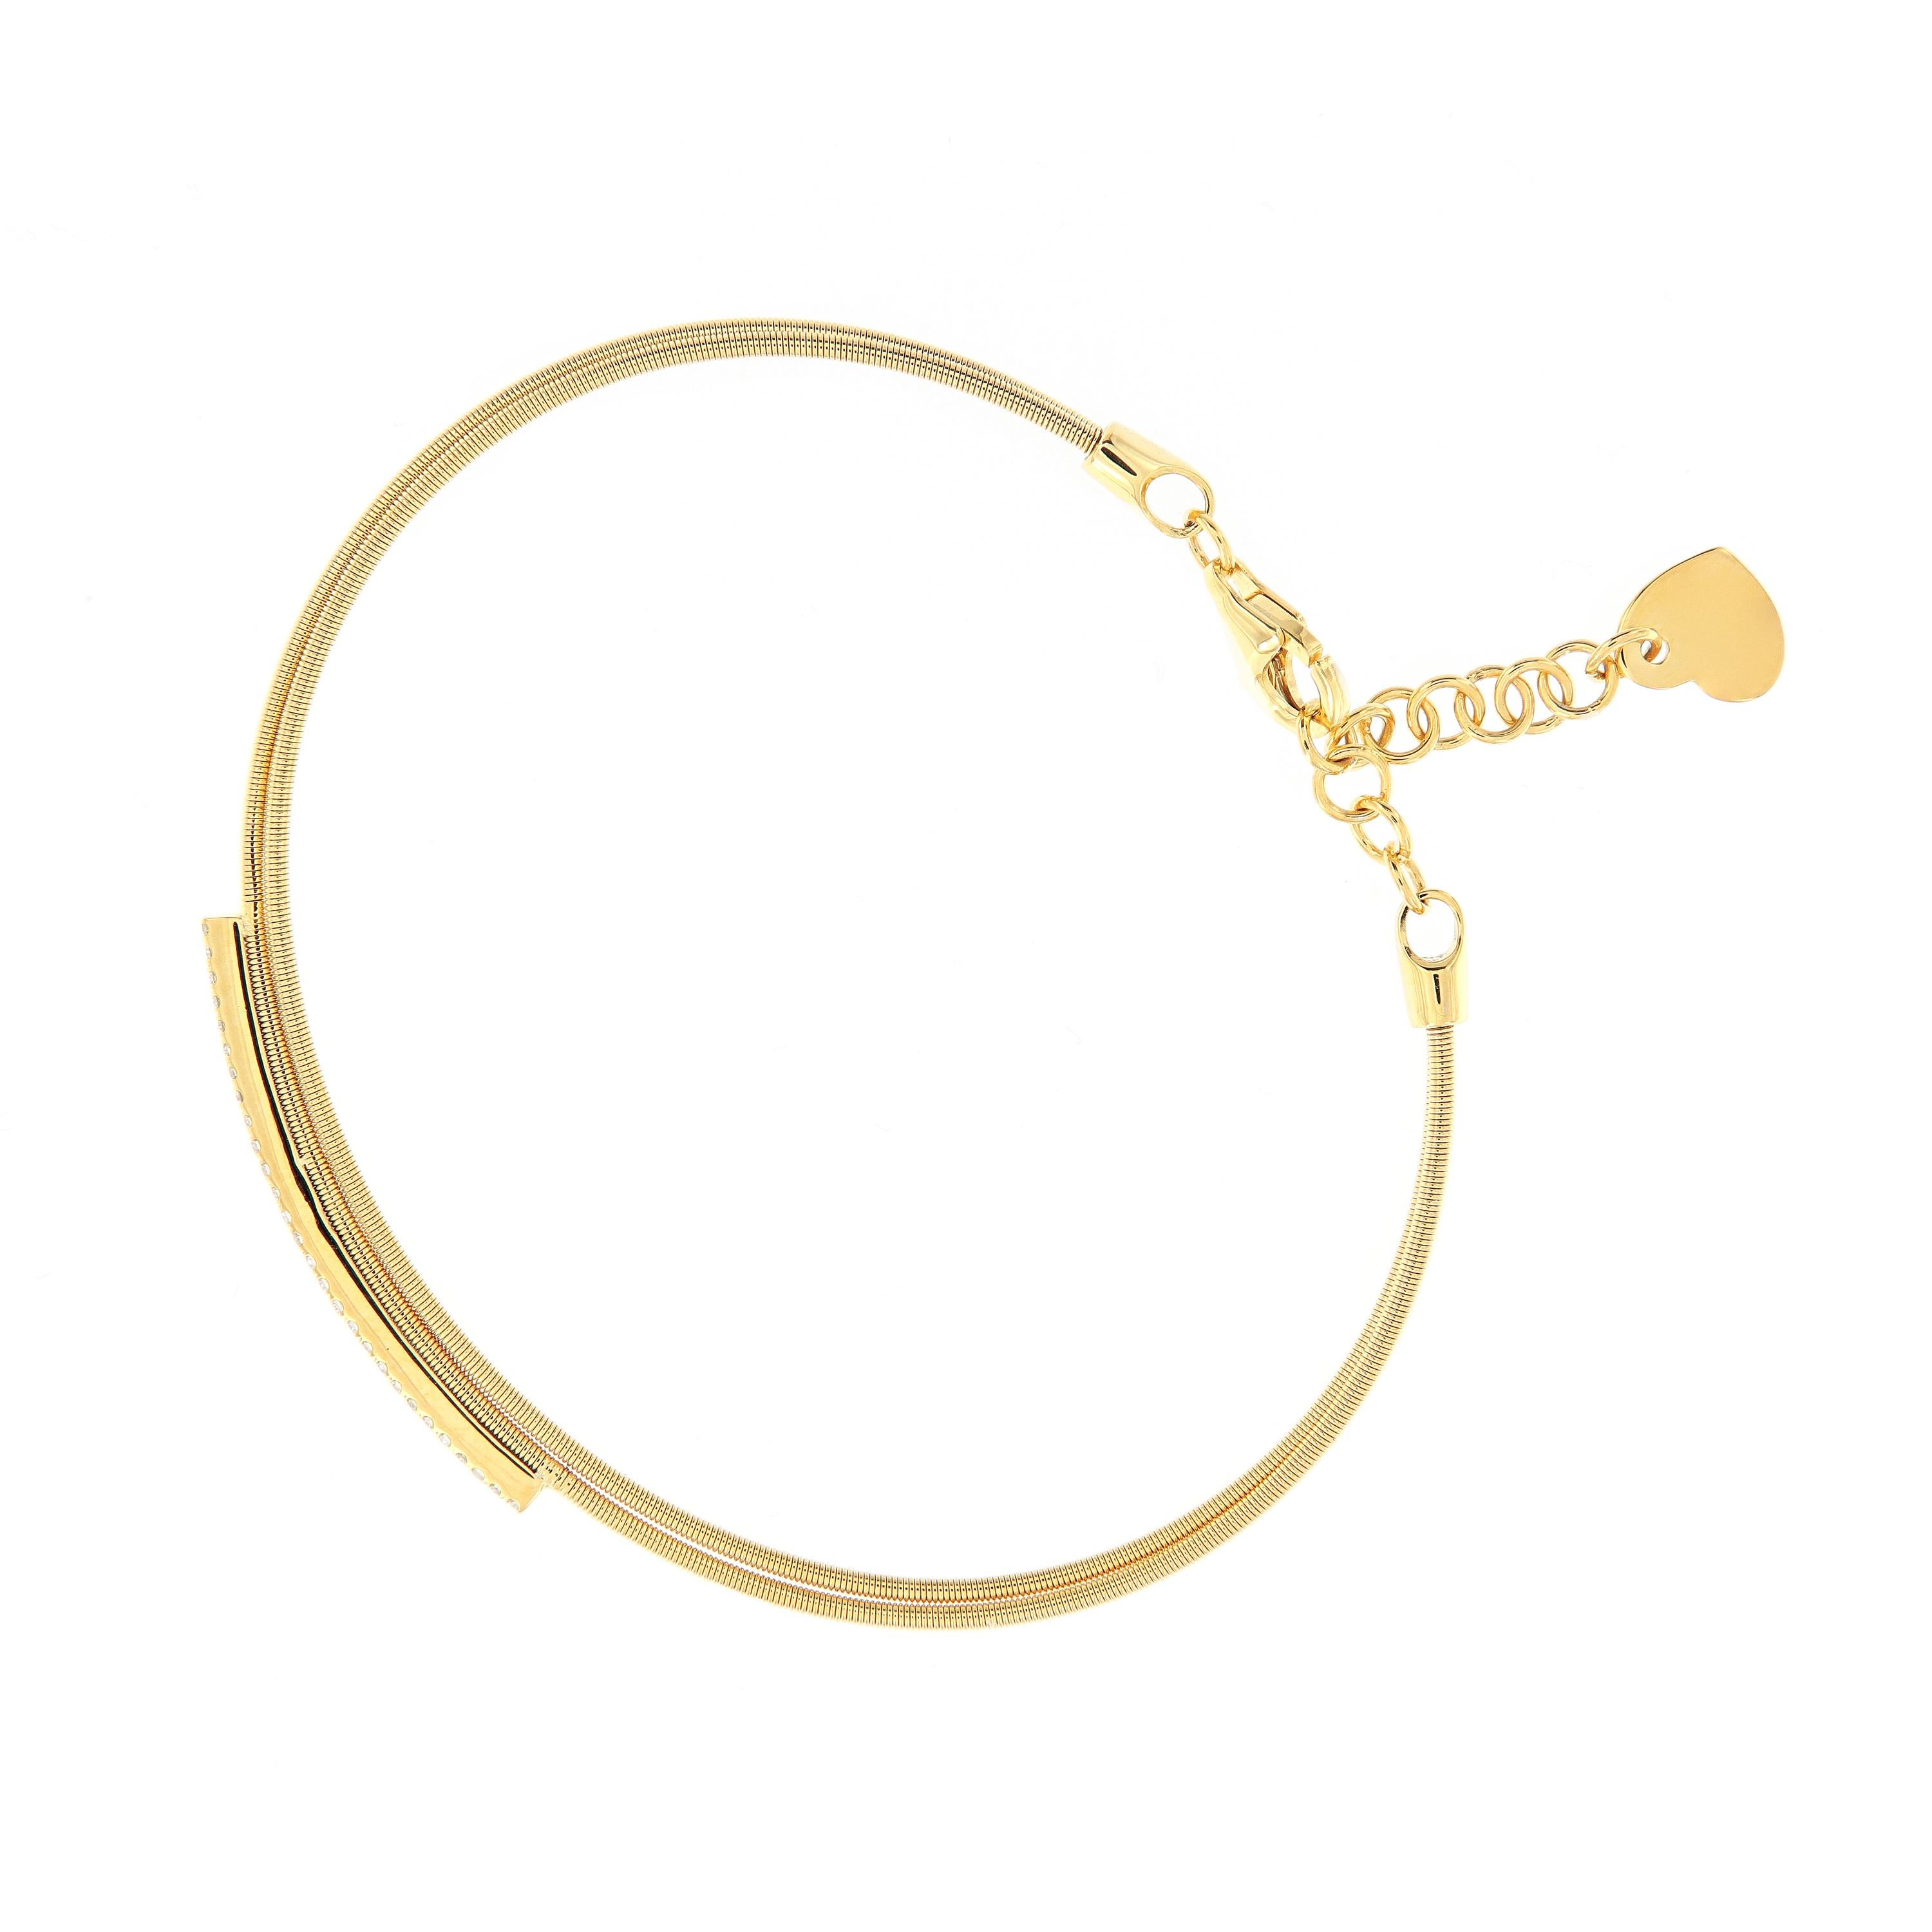 Wrap her wrist in the sparkle and comfort. This double wire bracelet is crafted in 18k yellow gold accented with a 18k yellow bar of diamonds. Bracelet secures with a safety chain clasp detailed with a heart dangle. Weighs 5.5 grams. Measures 2.25